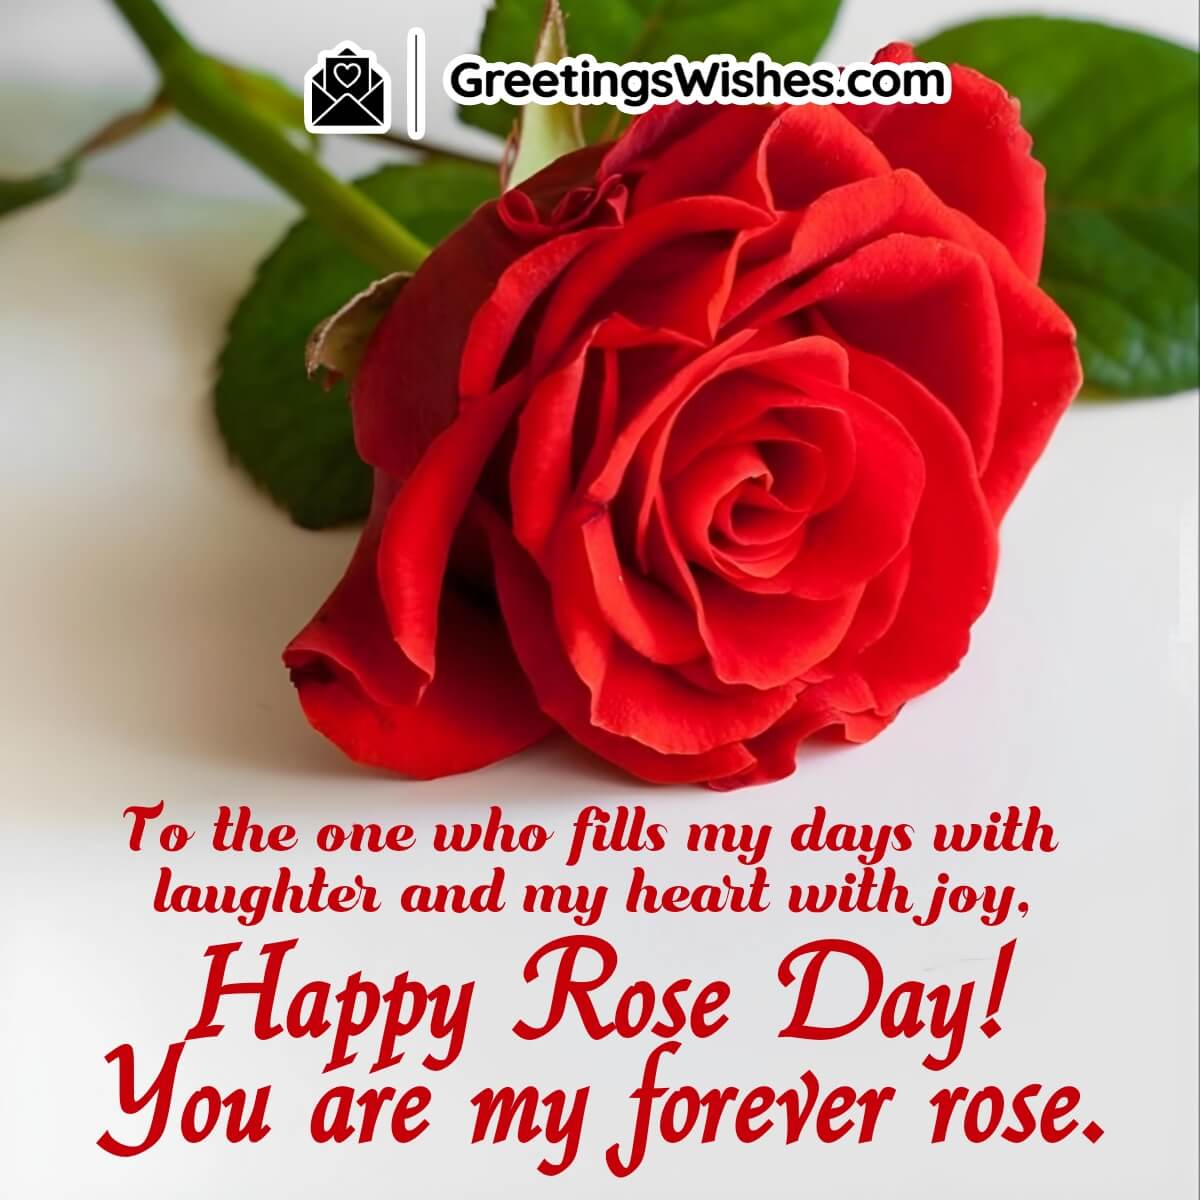 Rose Day Wishes For Boyfriend